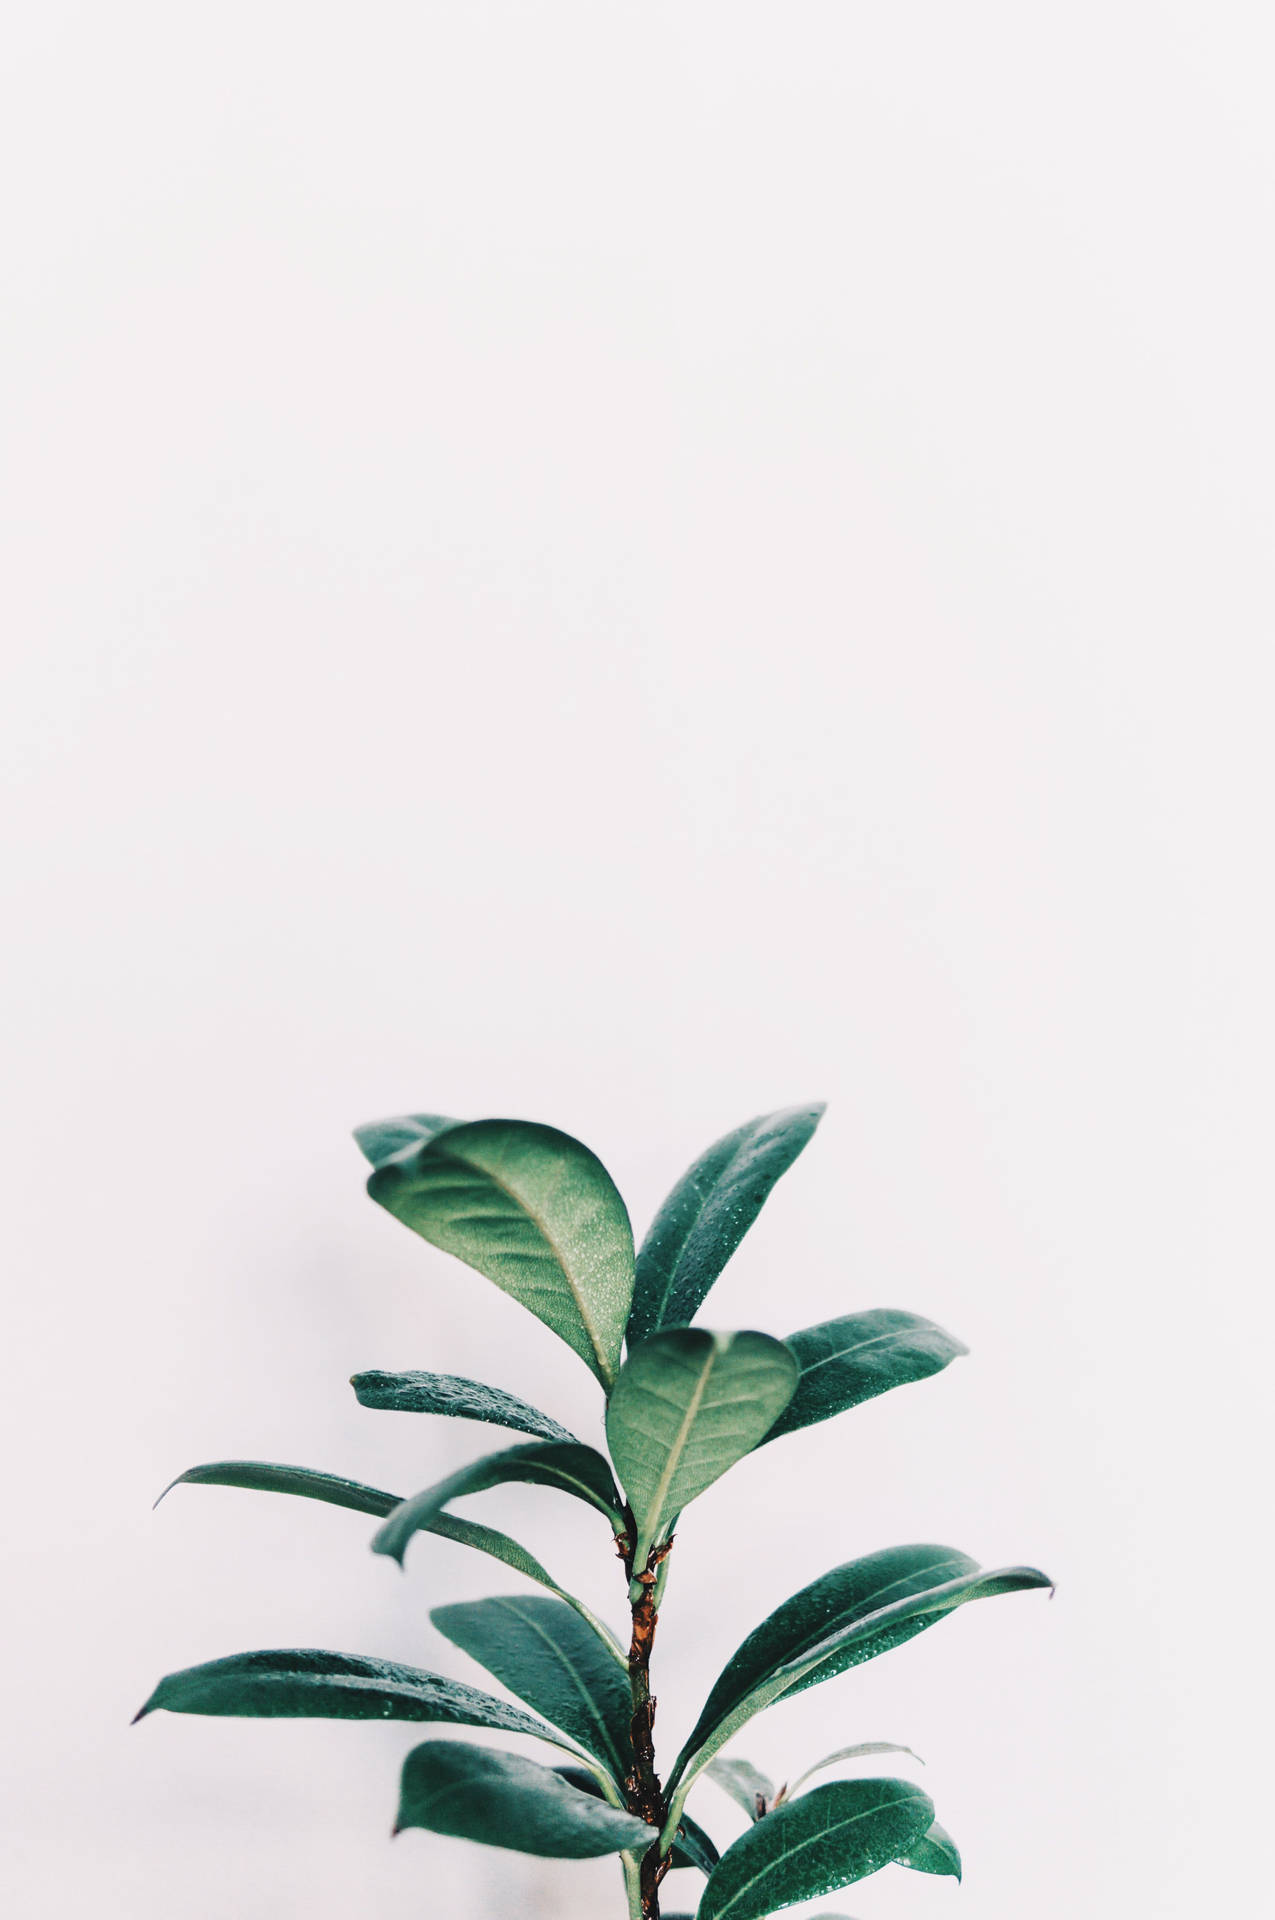 Tranquil White Aesthetic With Green Leaves For Iphone Wallpaper